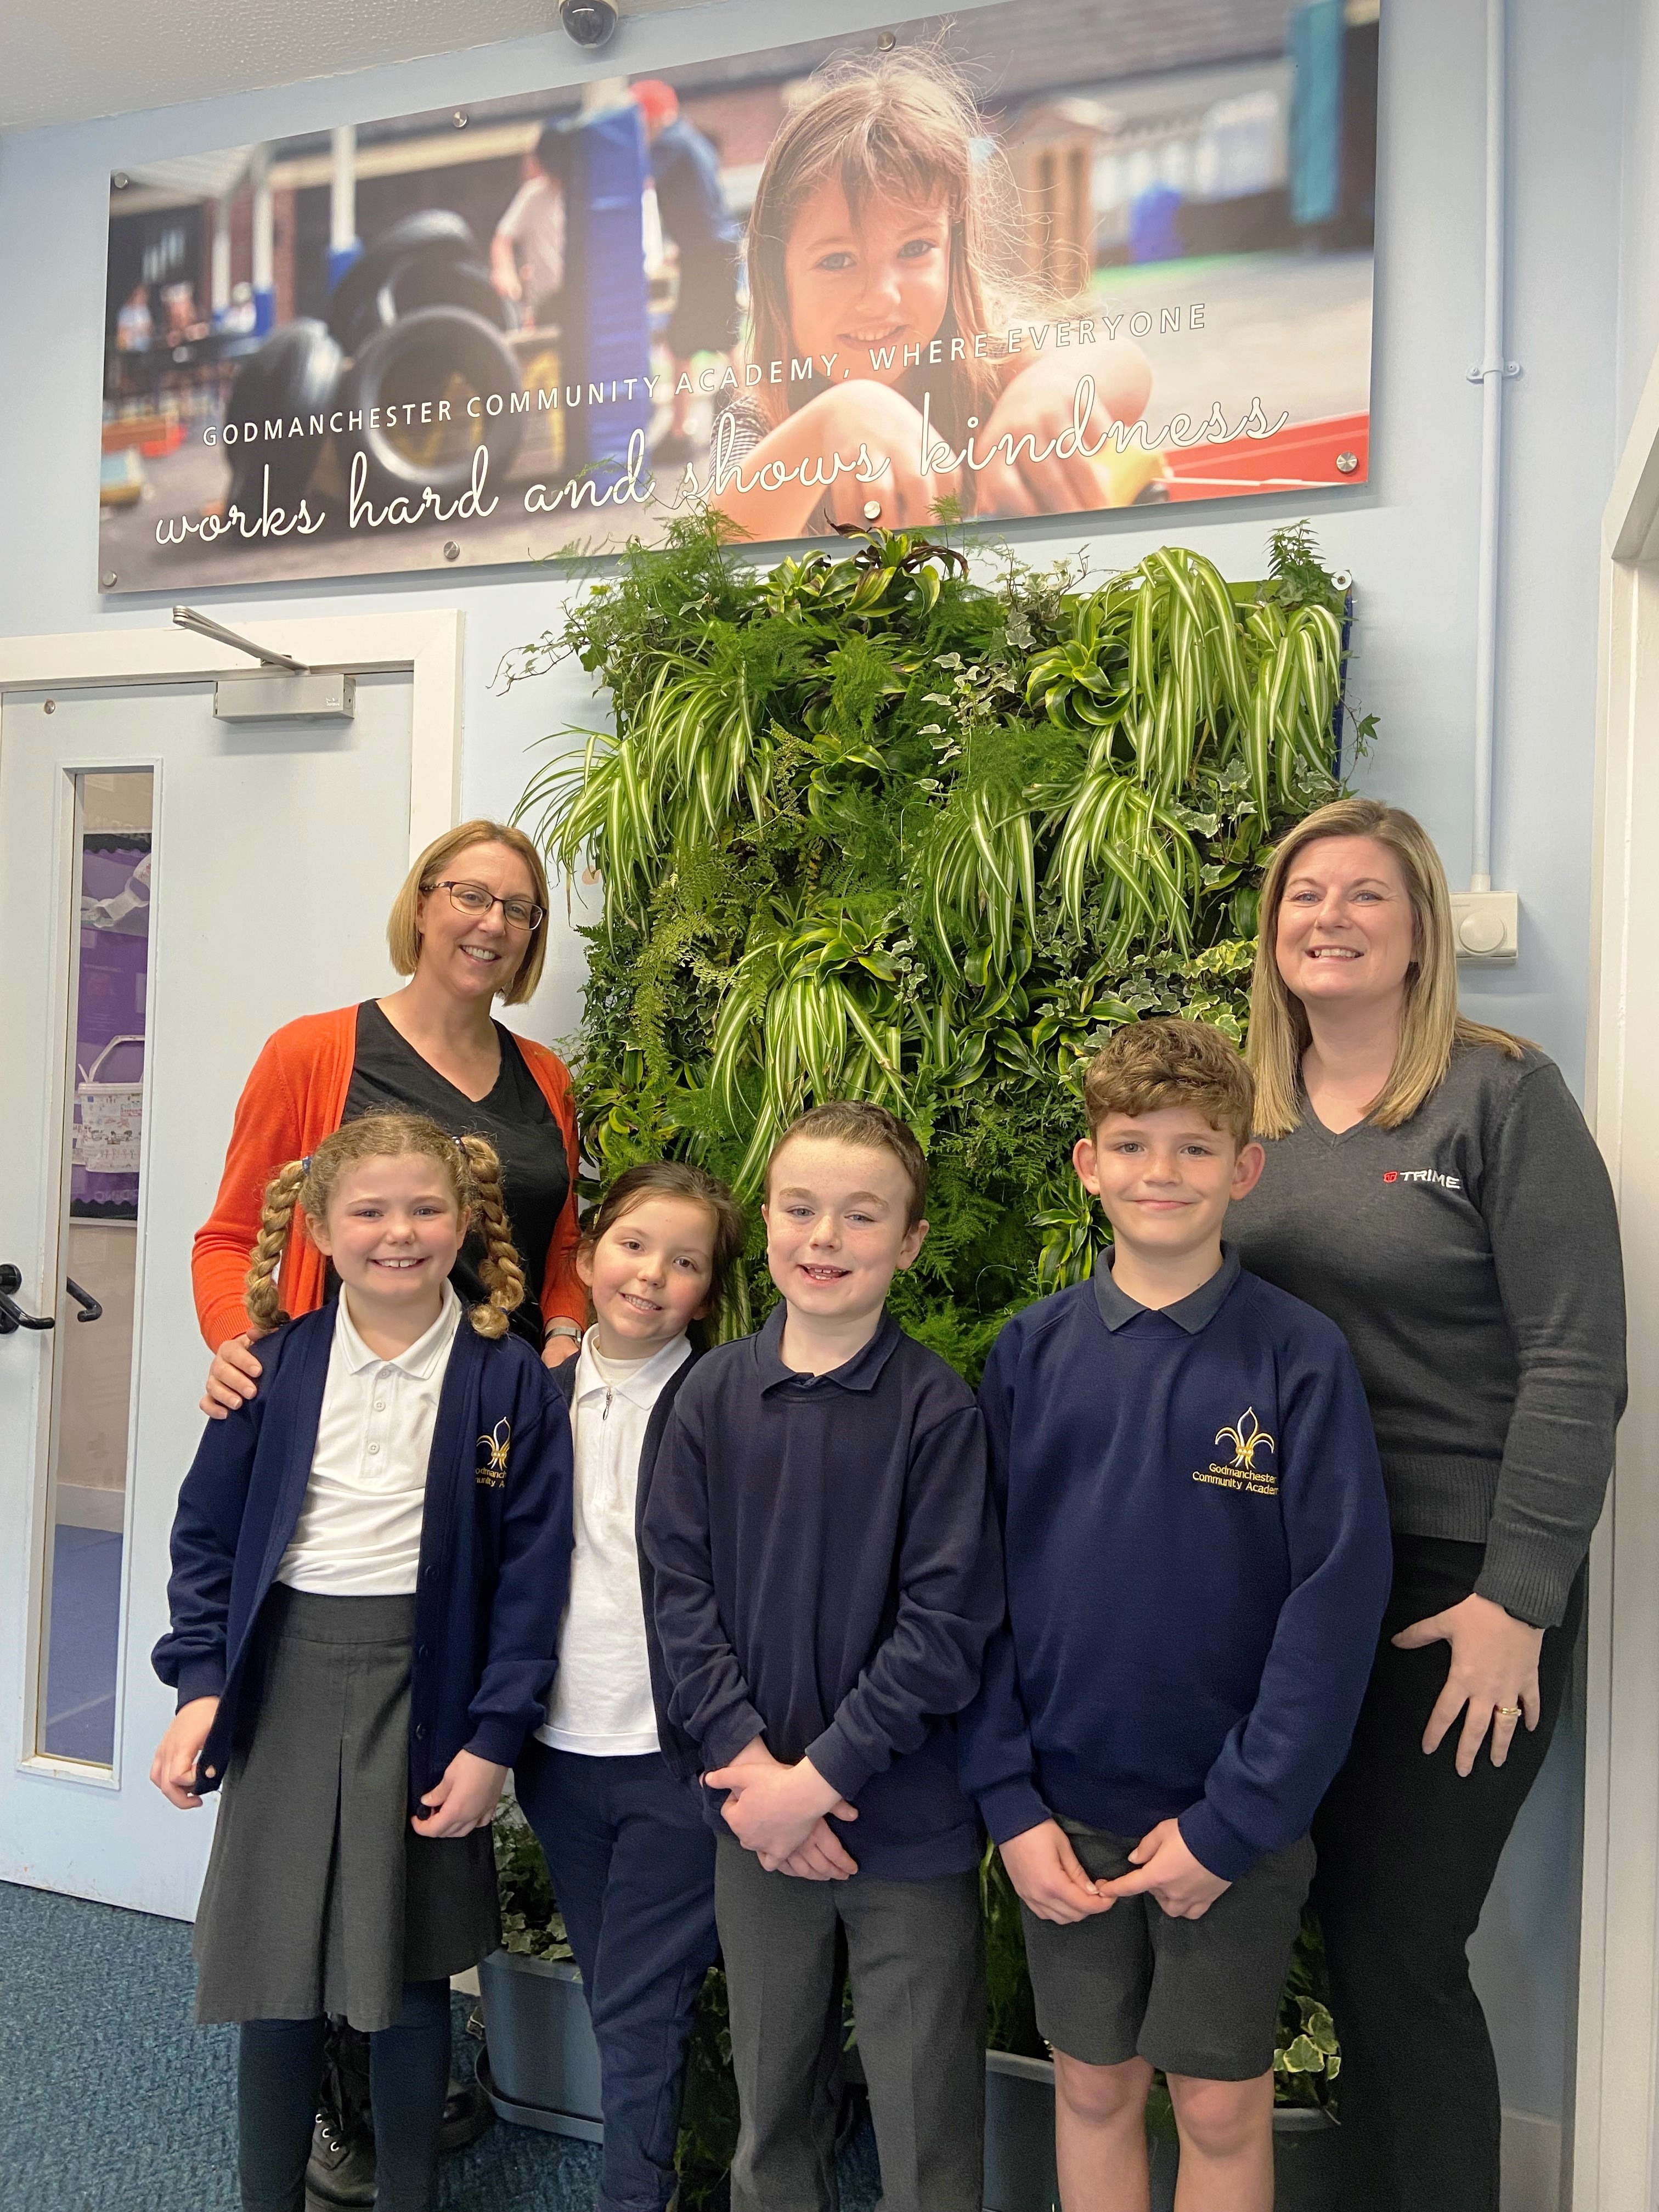 We donate our ‘Living Wall’ to a Godmanchester Primary School